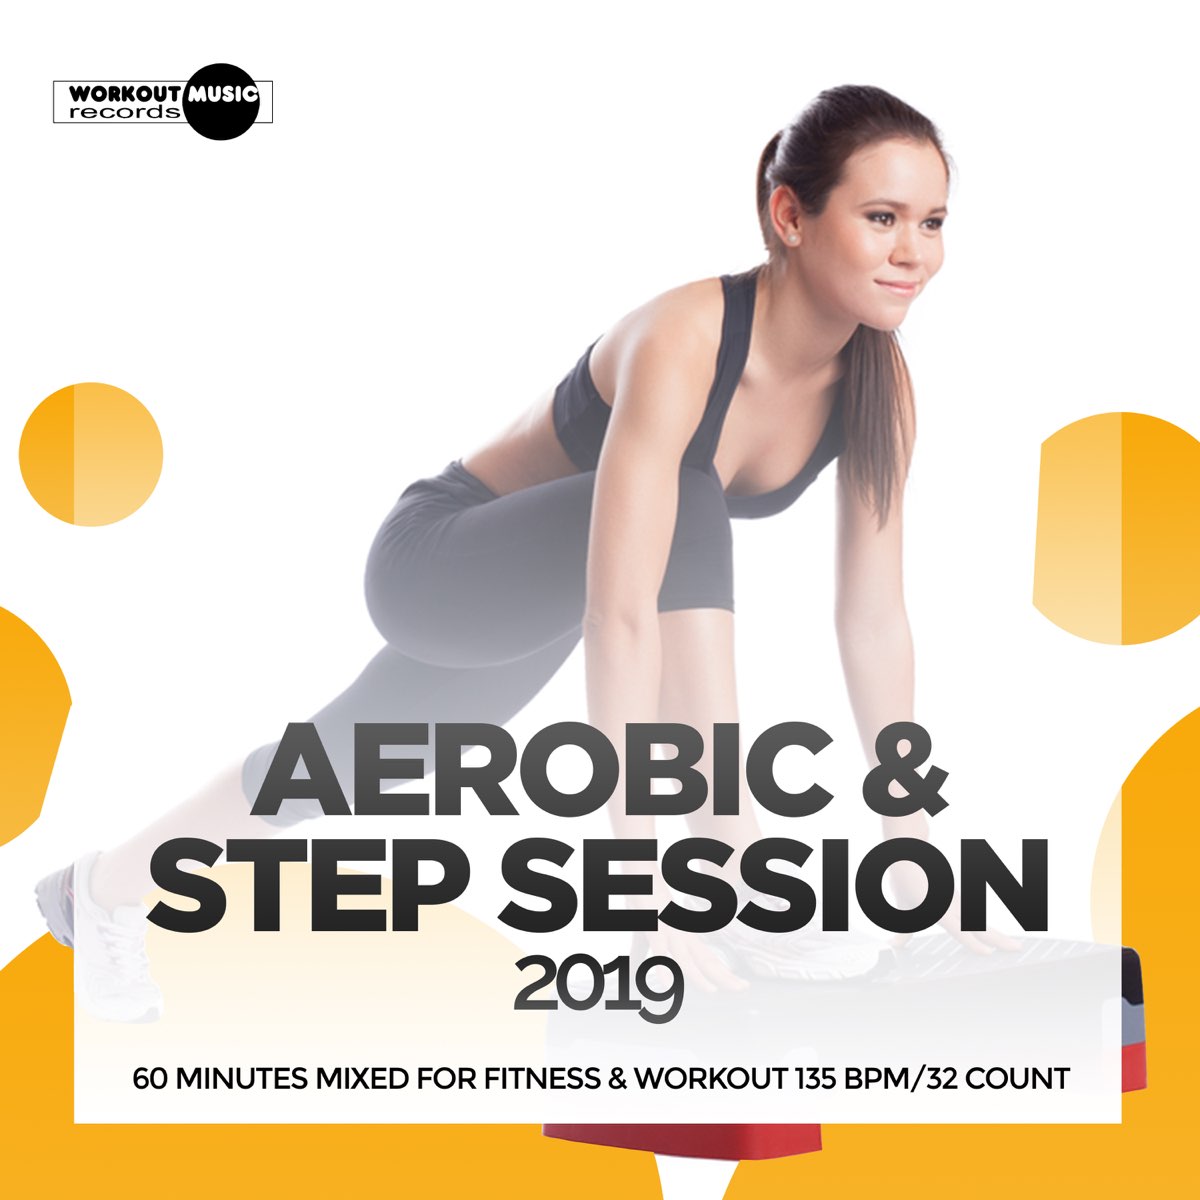 Aerobic & Step Session 2019: 60 Minutes Mixed for Fitness & Workout 135  bpm/32 Count (DJ MIX) by SuperFitness on Apple Music